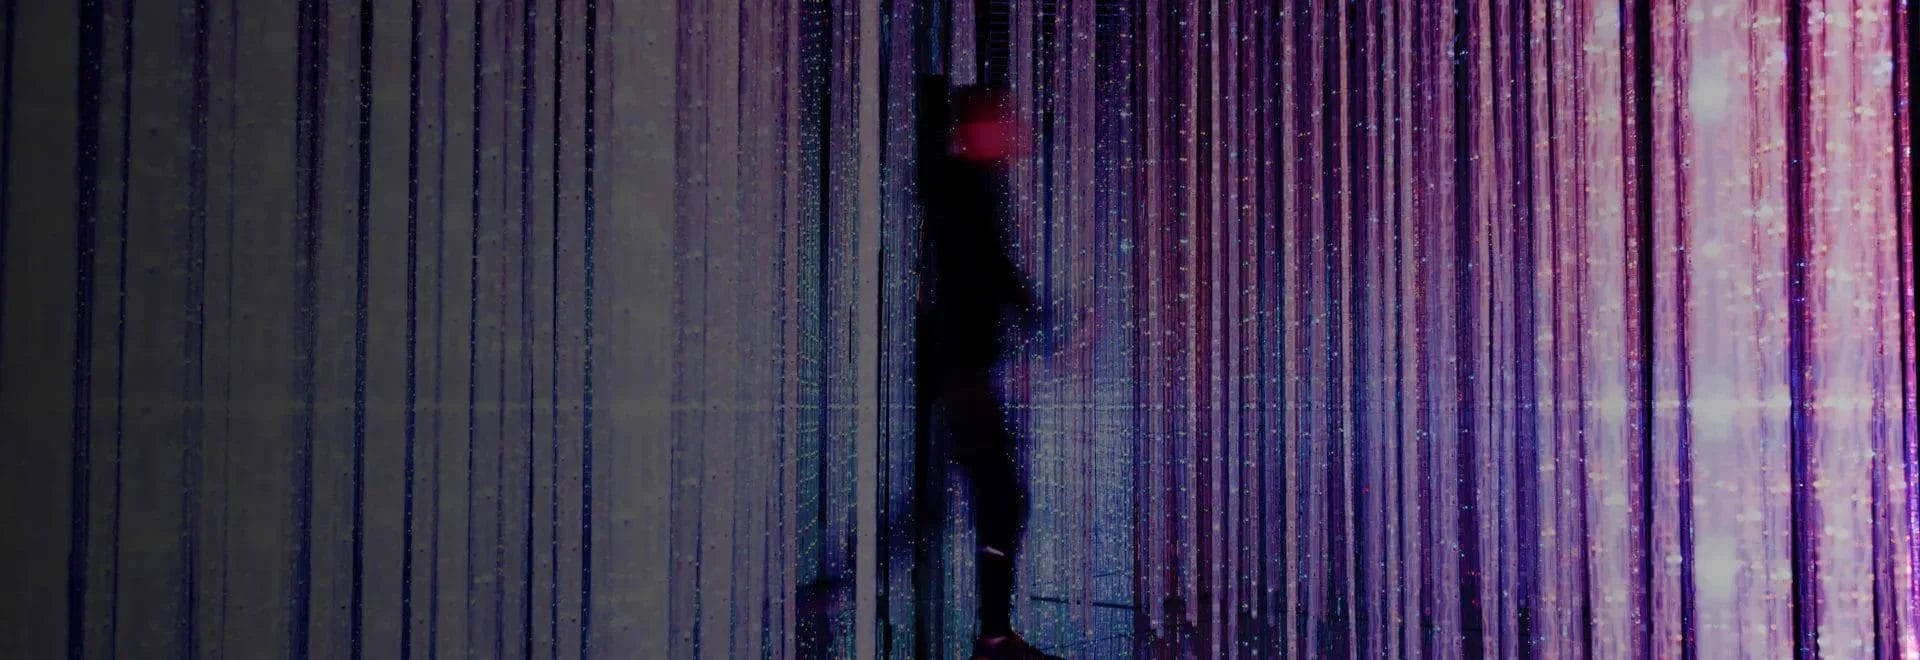 A blurry abstract of a person walking amongst a colorful backdrop